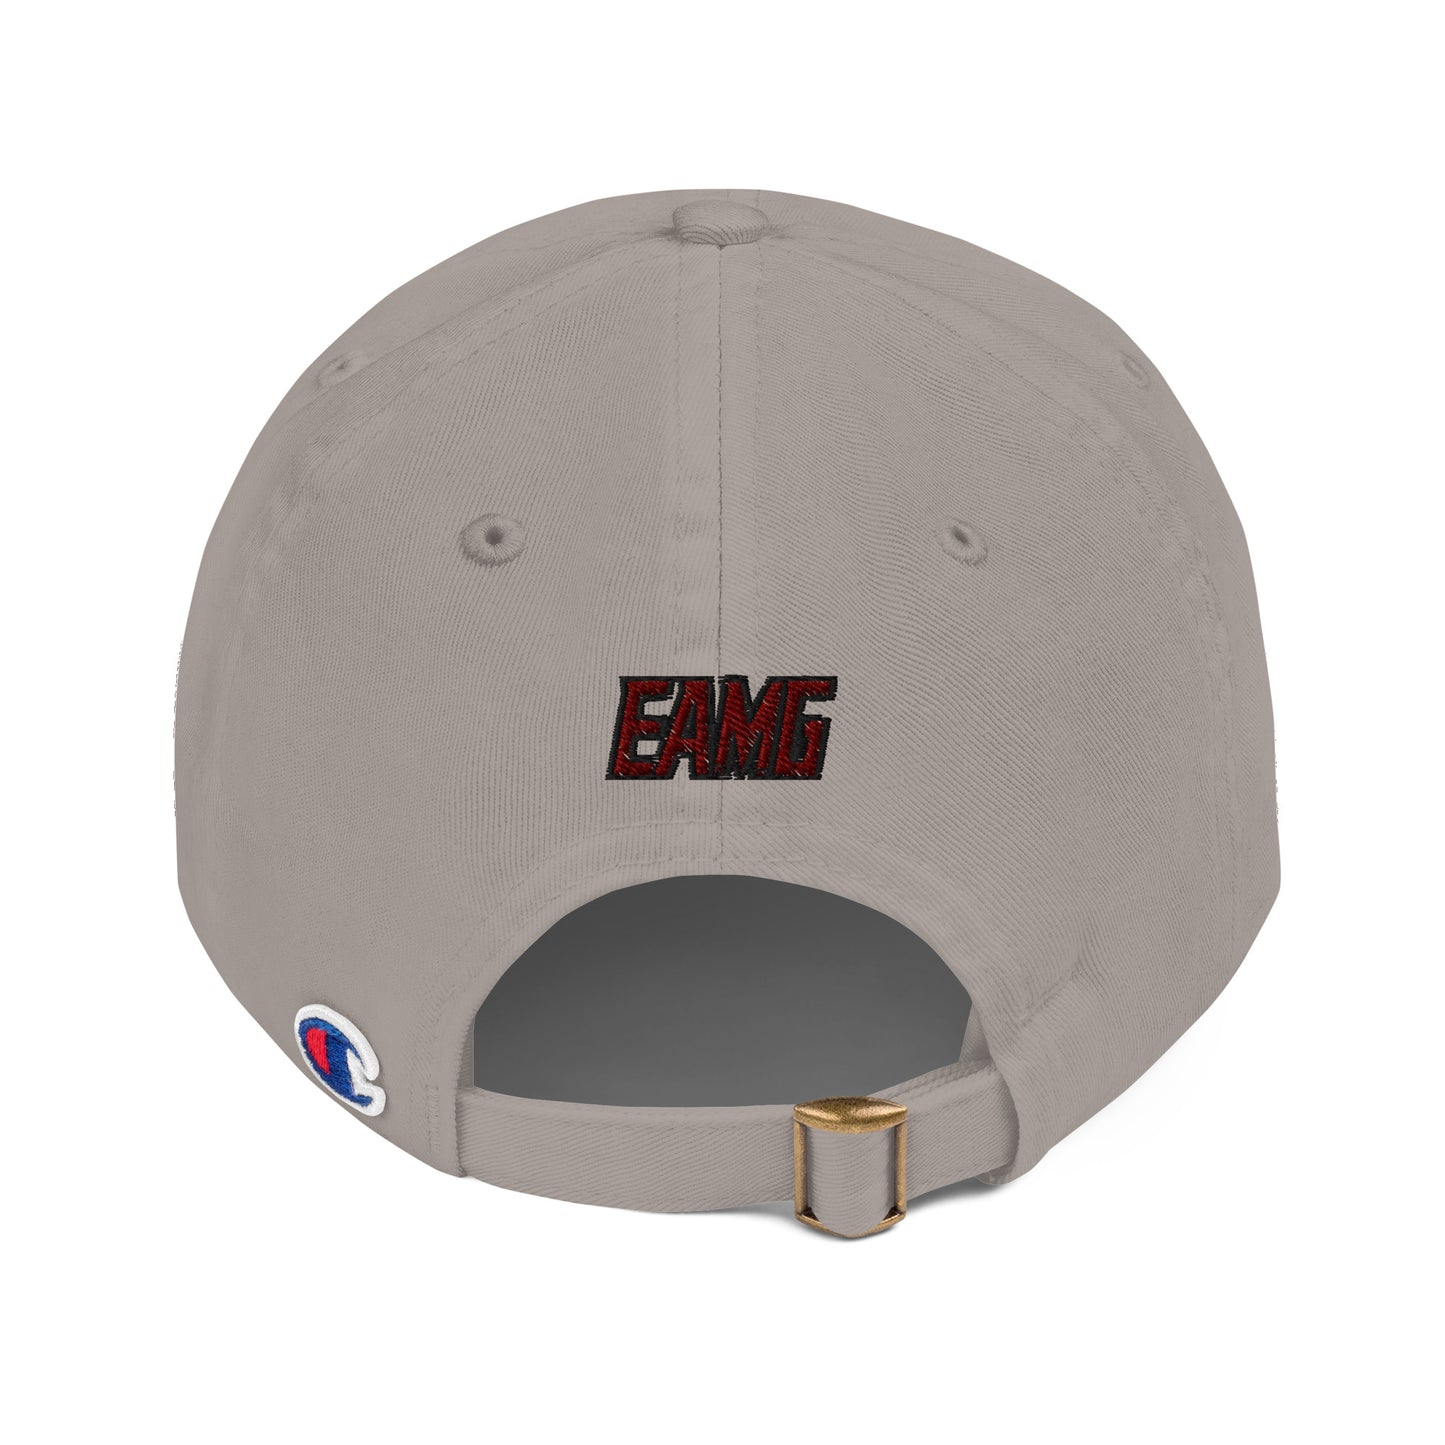 AW Embroidered Champion Dad Cap